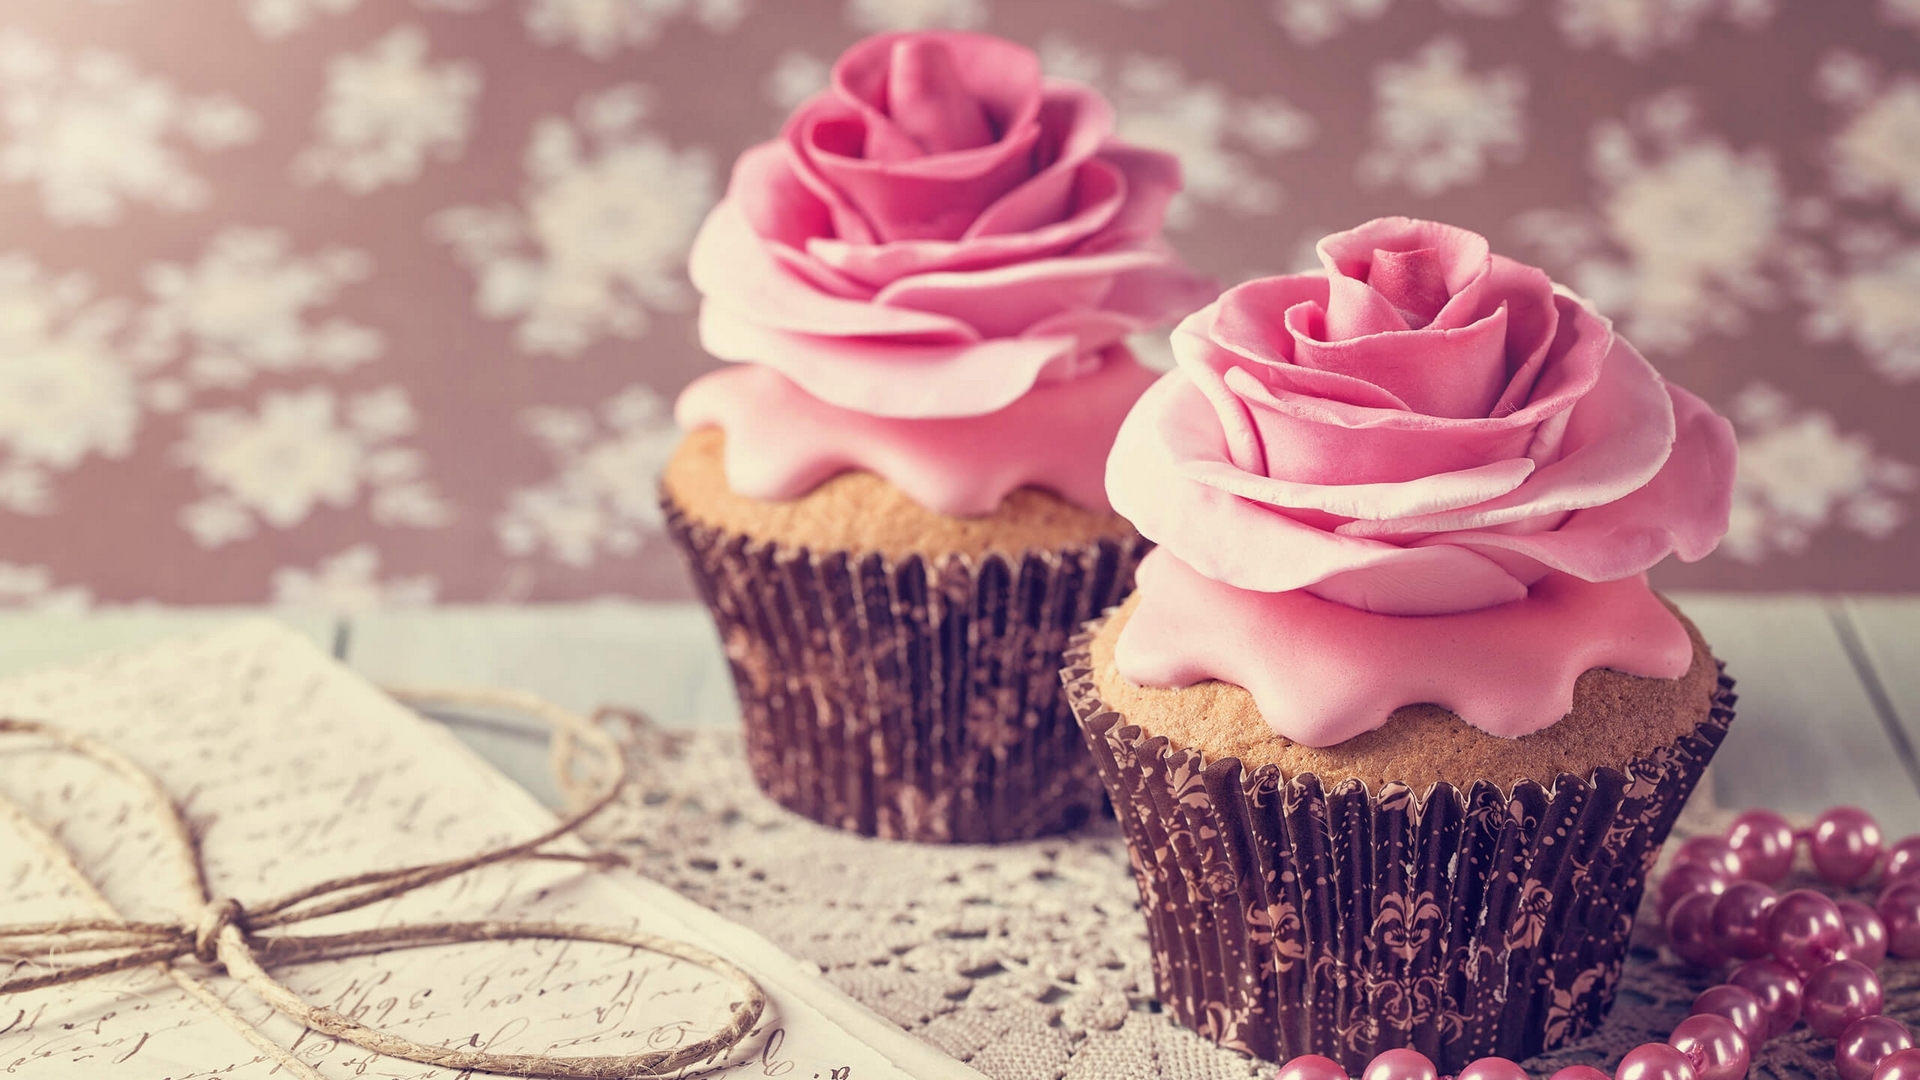 cupcakes HD wallpaper, background